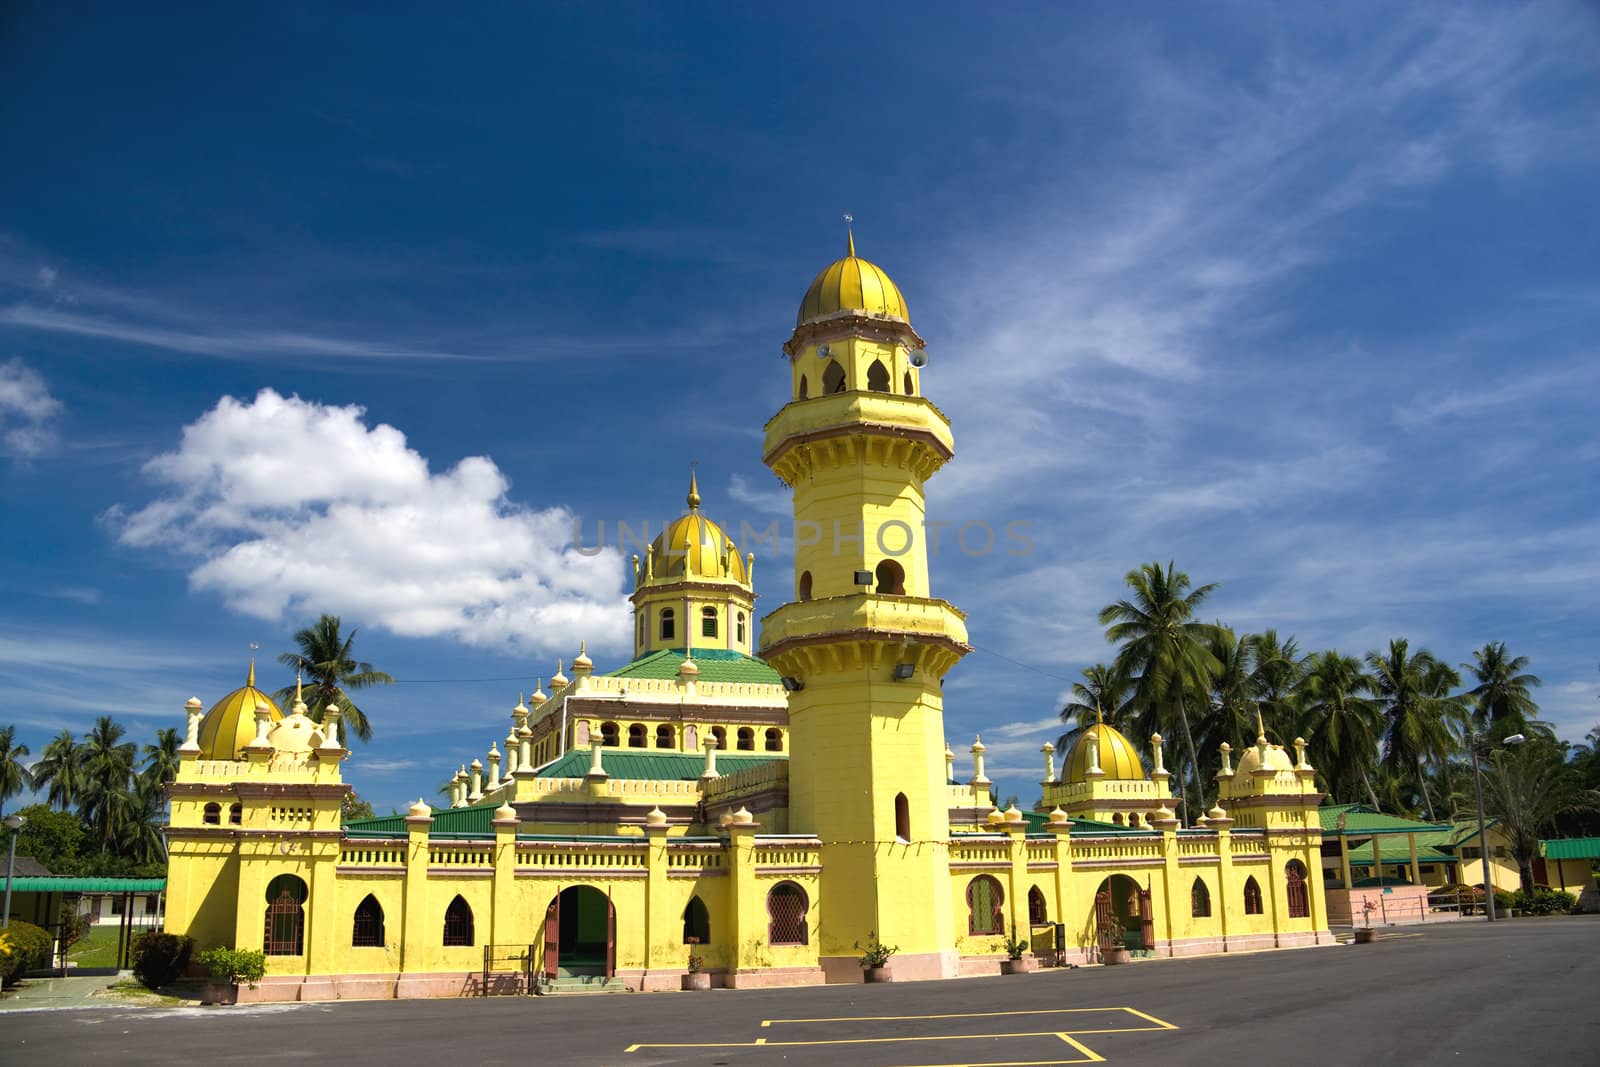 Over a century old Sultan Alaeddin Mosque, located at the old royal town of Jugra, Selangor, Malaysia.